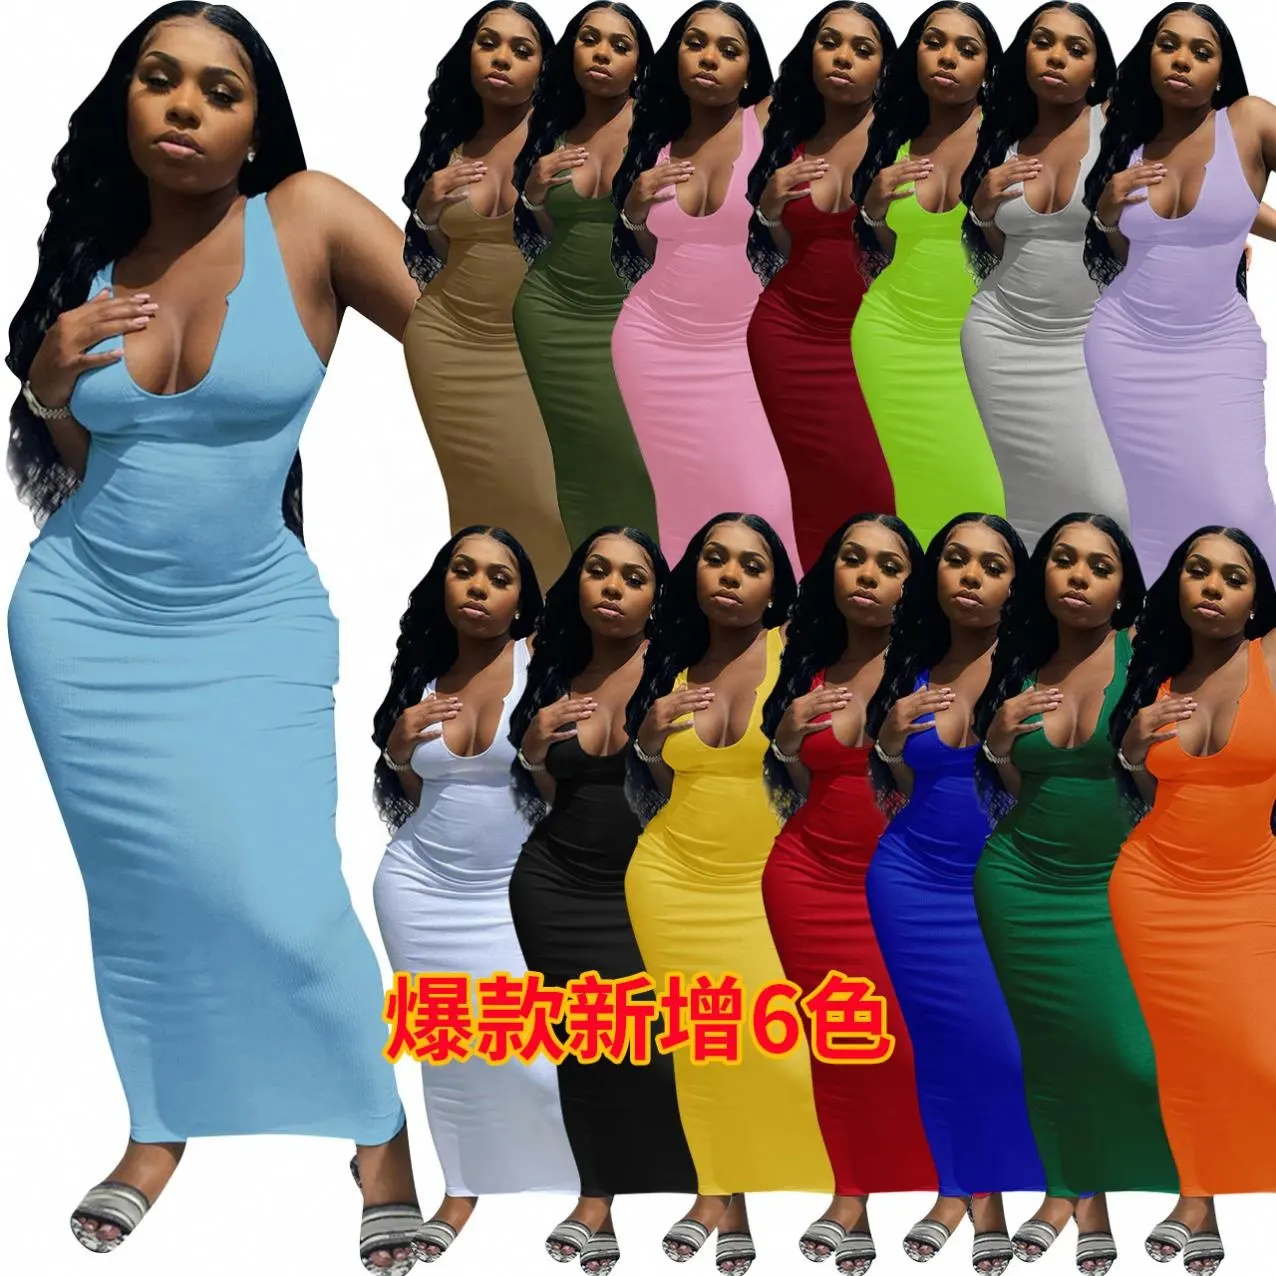 Women Two Piece Dresses Bodycon Pencil Set Short Tank Top And Knee Length Skirt Set Sexy Slim Fit Outfits for Summer Women Dress